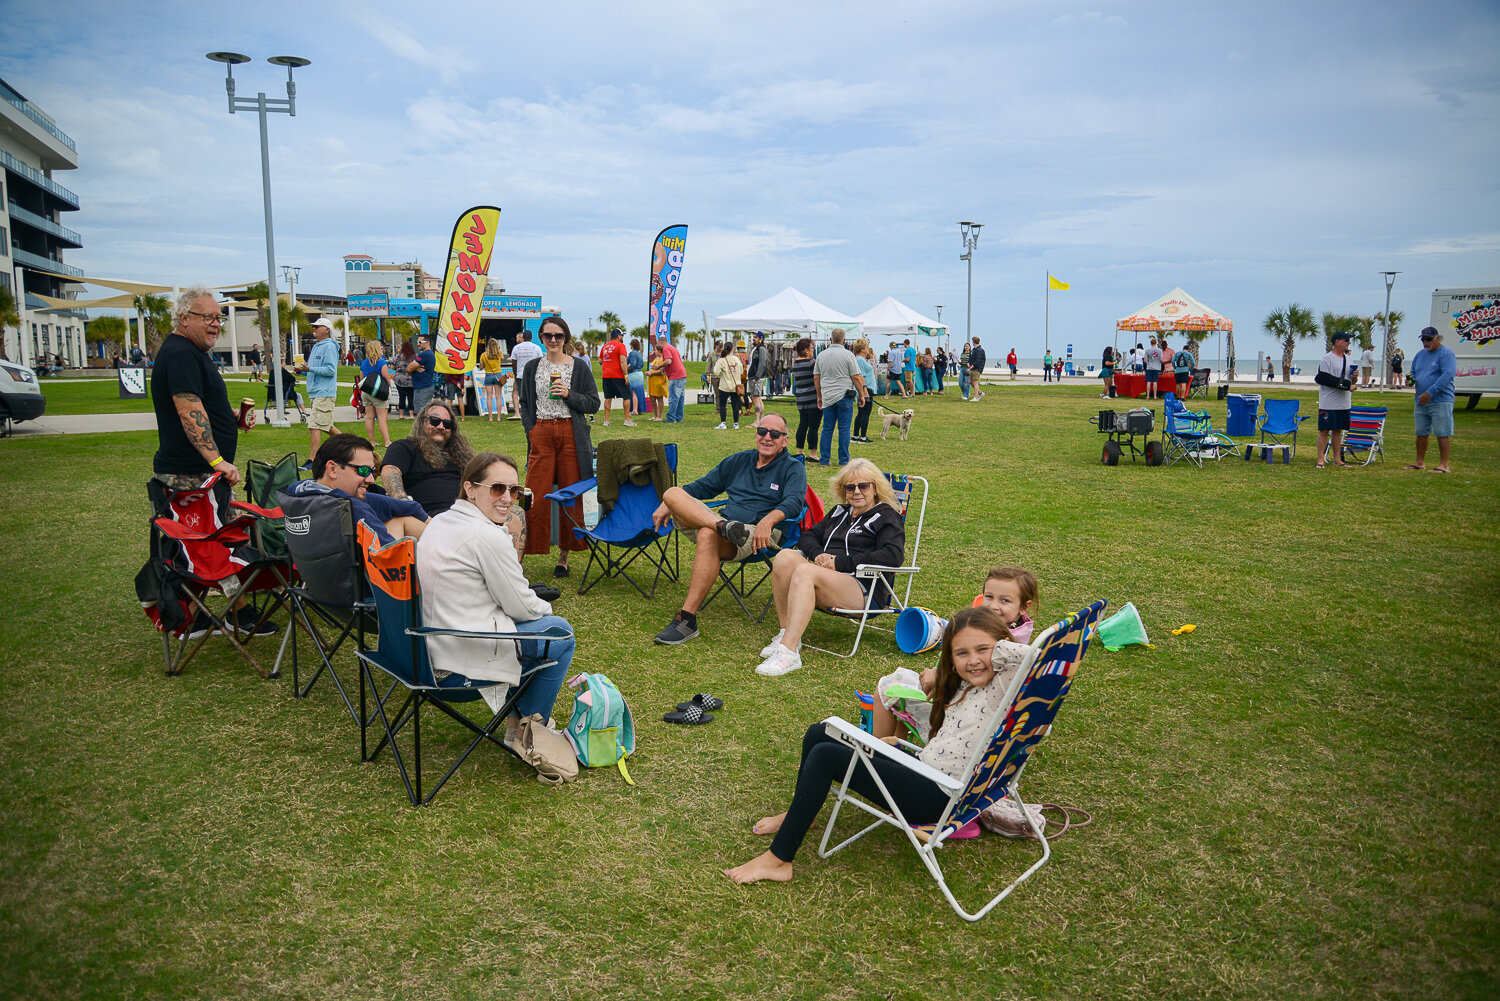 Gather up your friends and family, grab the beach chairs and picnic blanket, and head to Gulf Place for the second annual Coastal Alabama Food Truck & Craft Beer Festival Nov. 11-12 from 11 a.m. to 5 p.m.